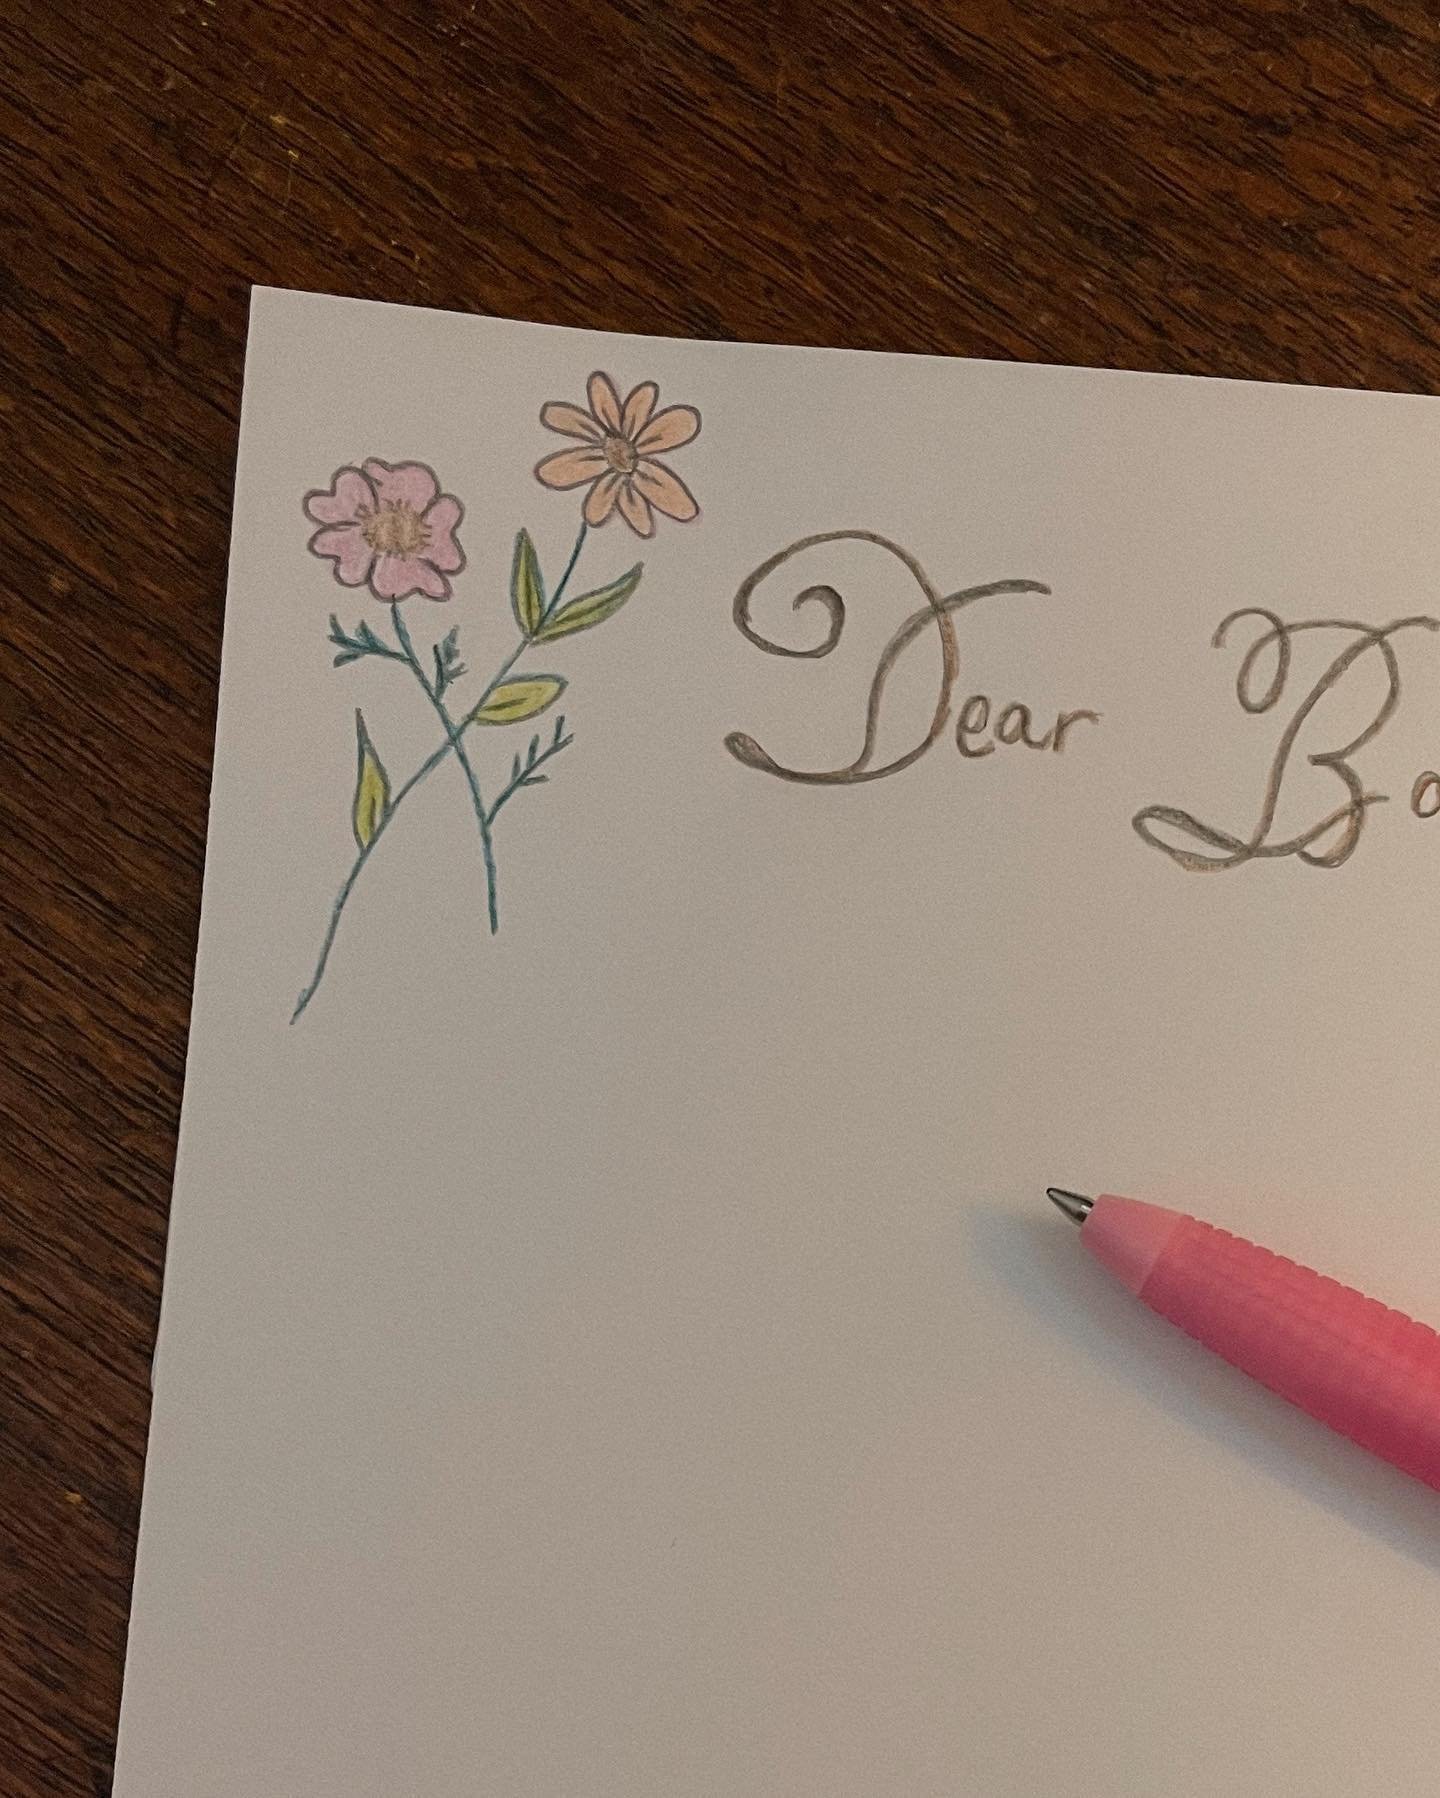 Today I wrote an actual hand written letter to a precious friend. I spent time adding a few hand drawn embellishments and fancy script.

It&rsquo;s very refreshing to write for the audience of one. It was just some random thoughts, some fun details a